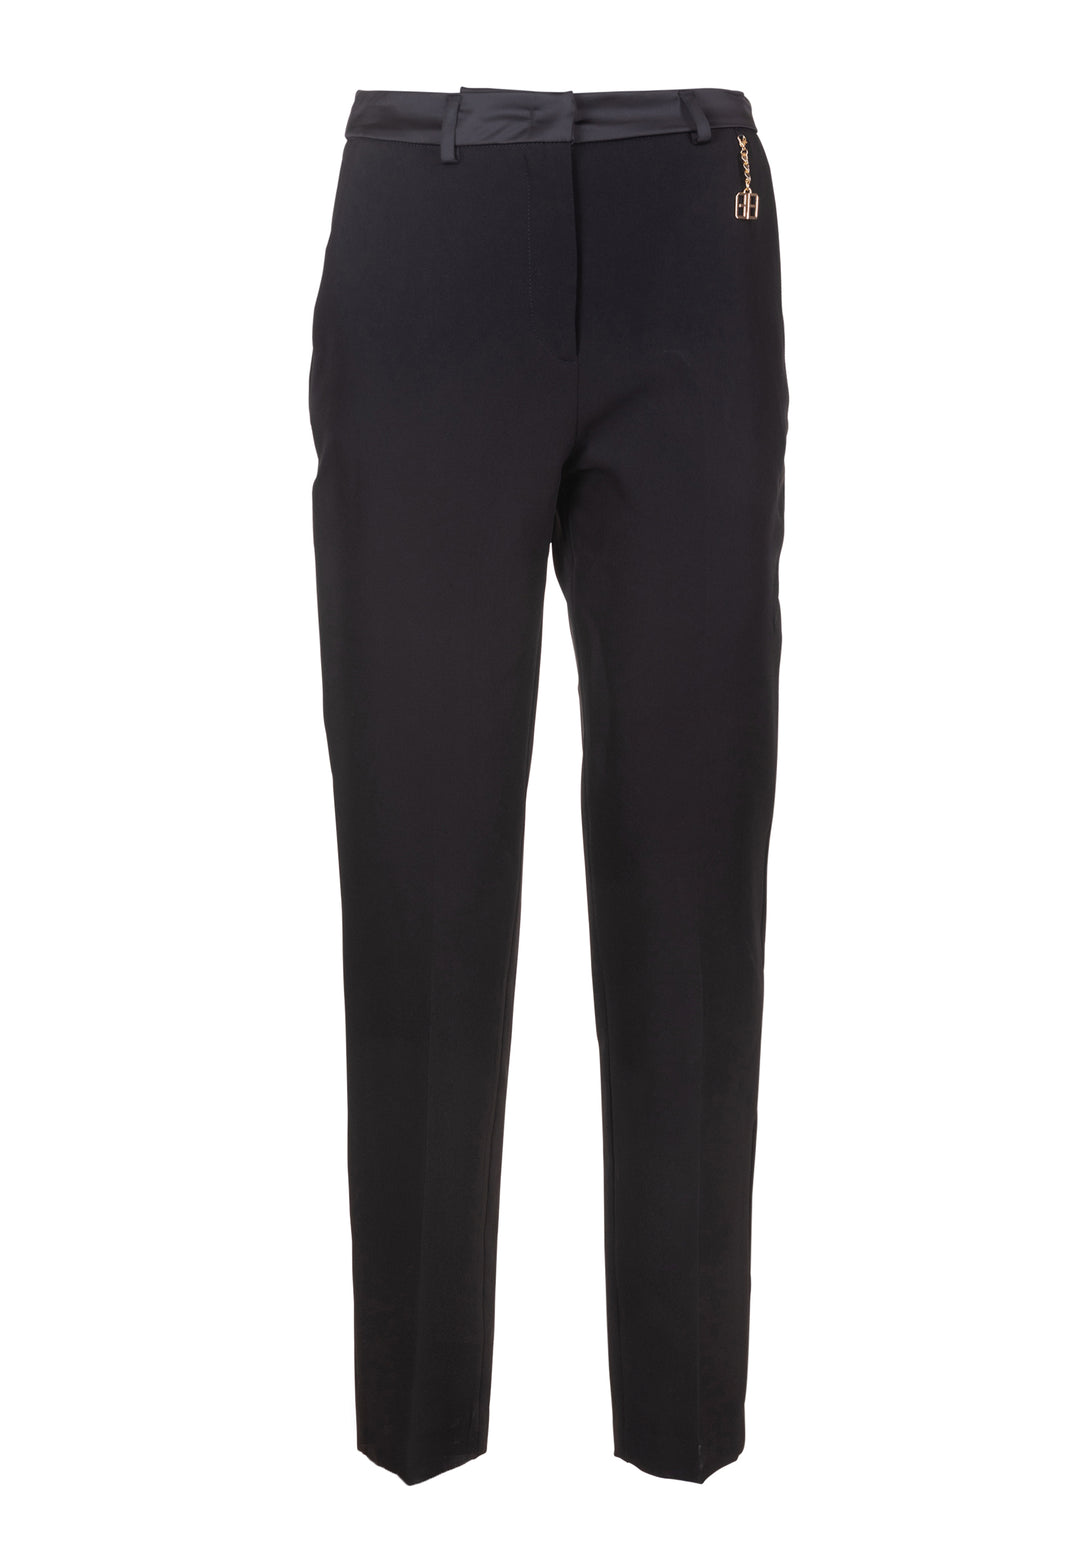 Pant regular fit made in technical fabric